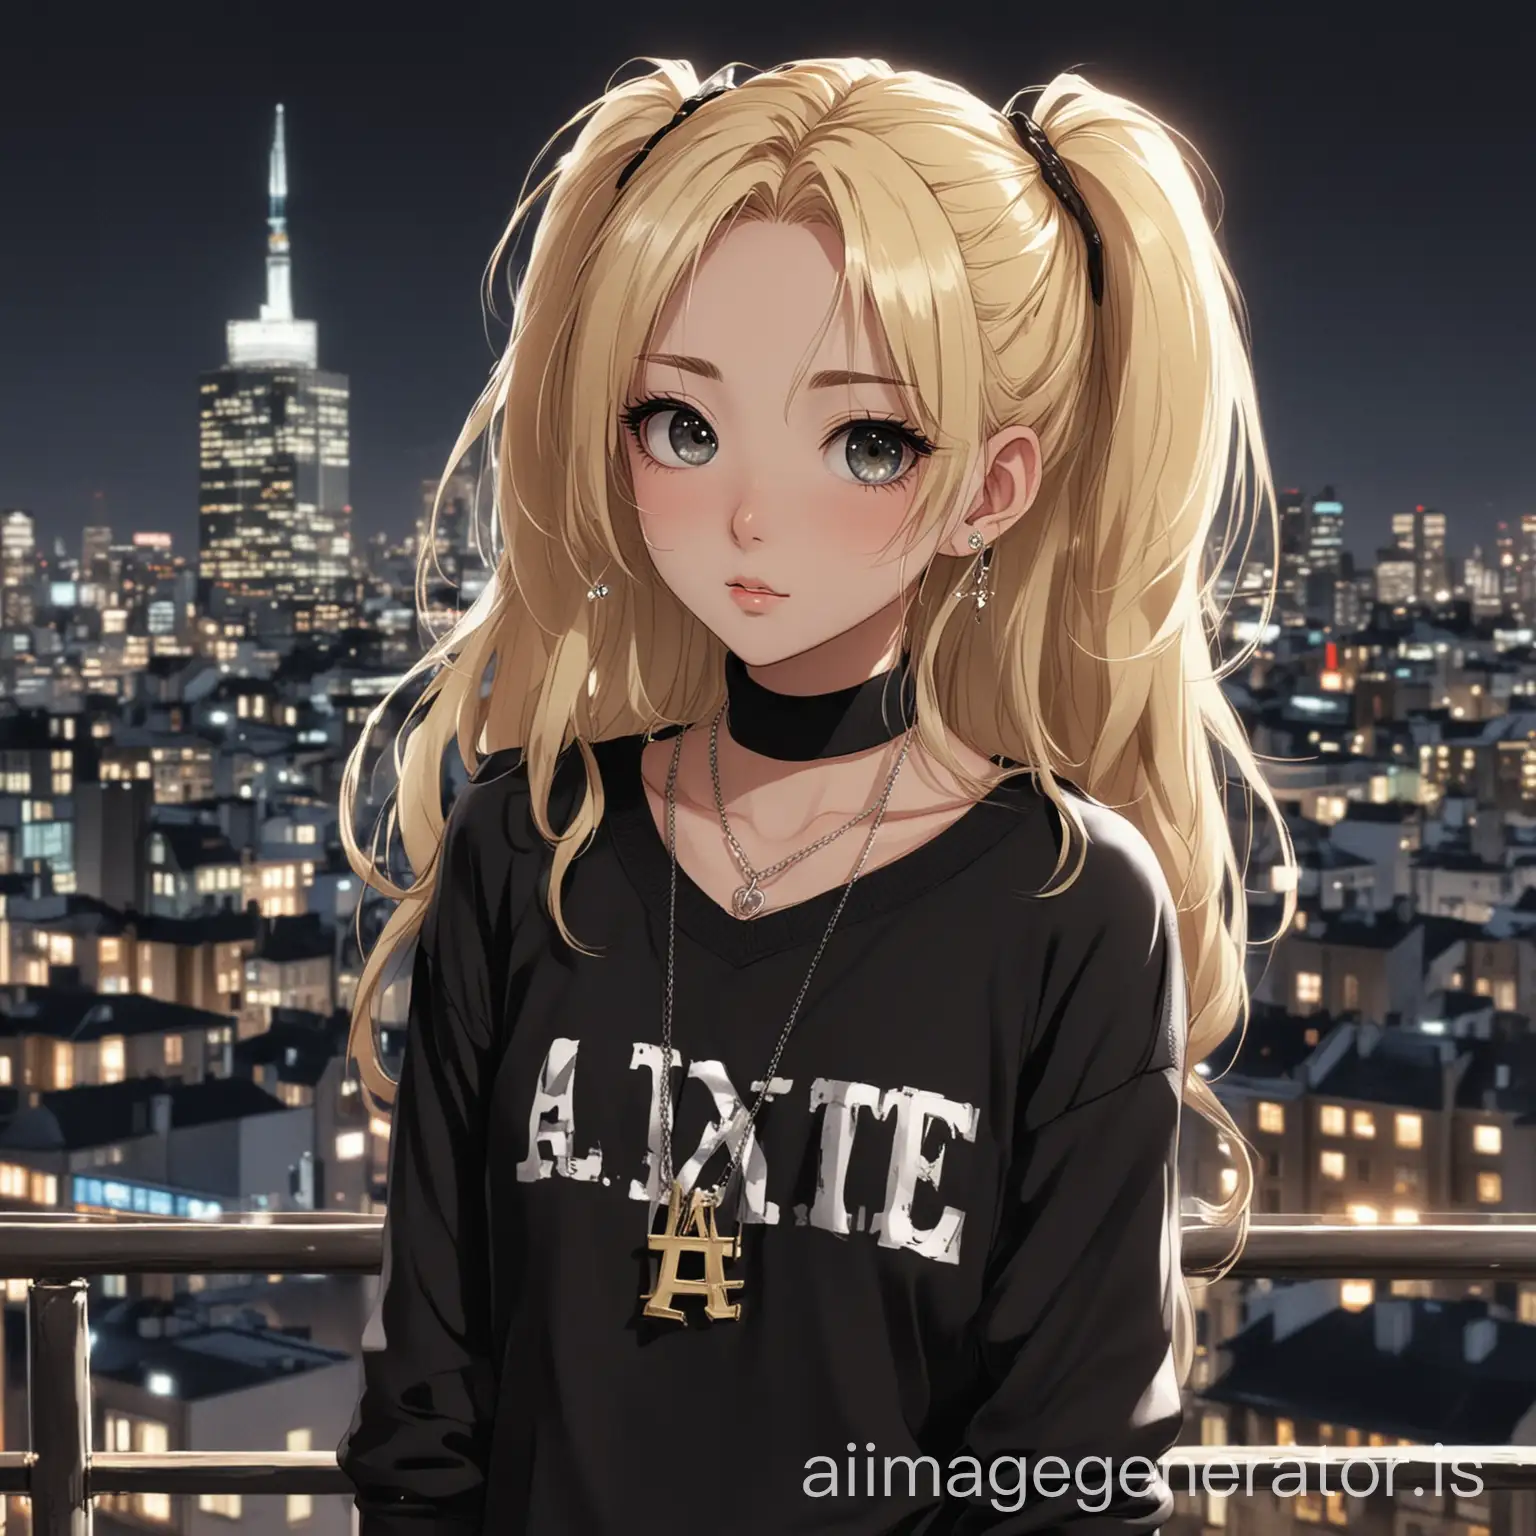 create me image[aesthetic anime girl, wearing pendant "A", Black sweater, Black and blonde hair, Background city